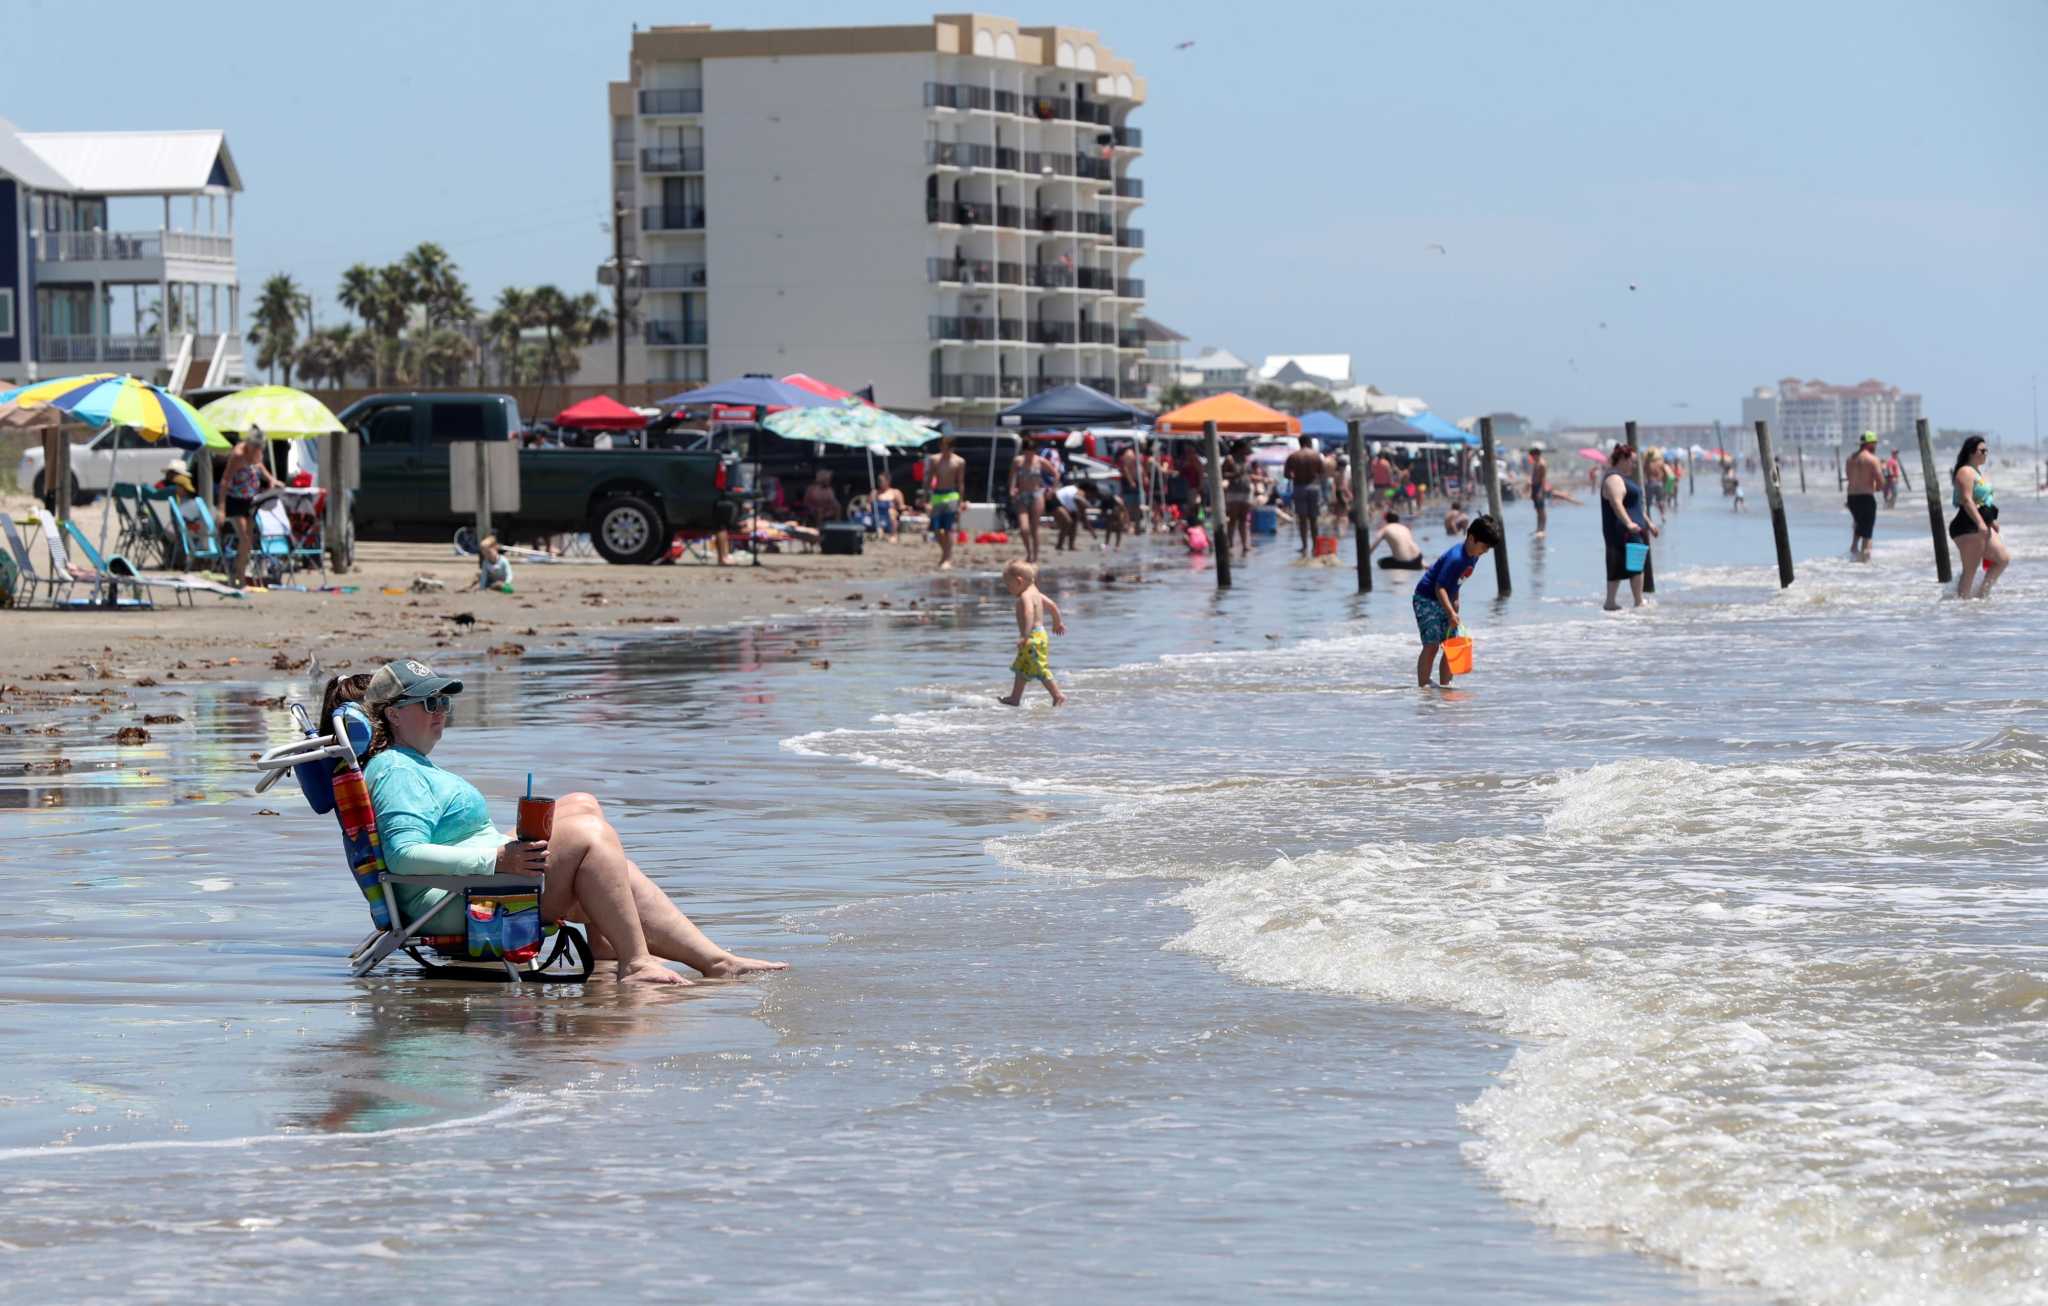 Galveston beaches reopen with mass crowds, some safety issues